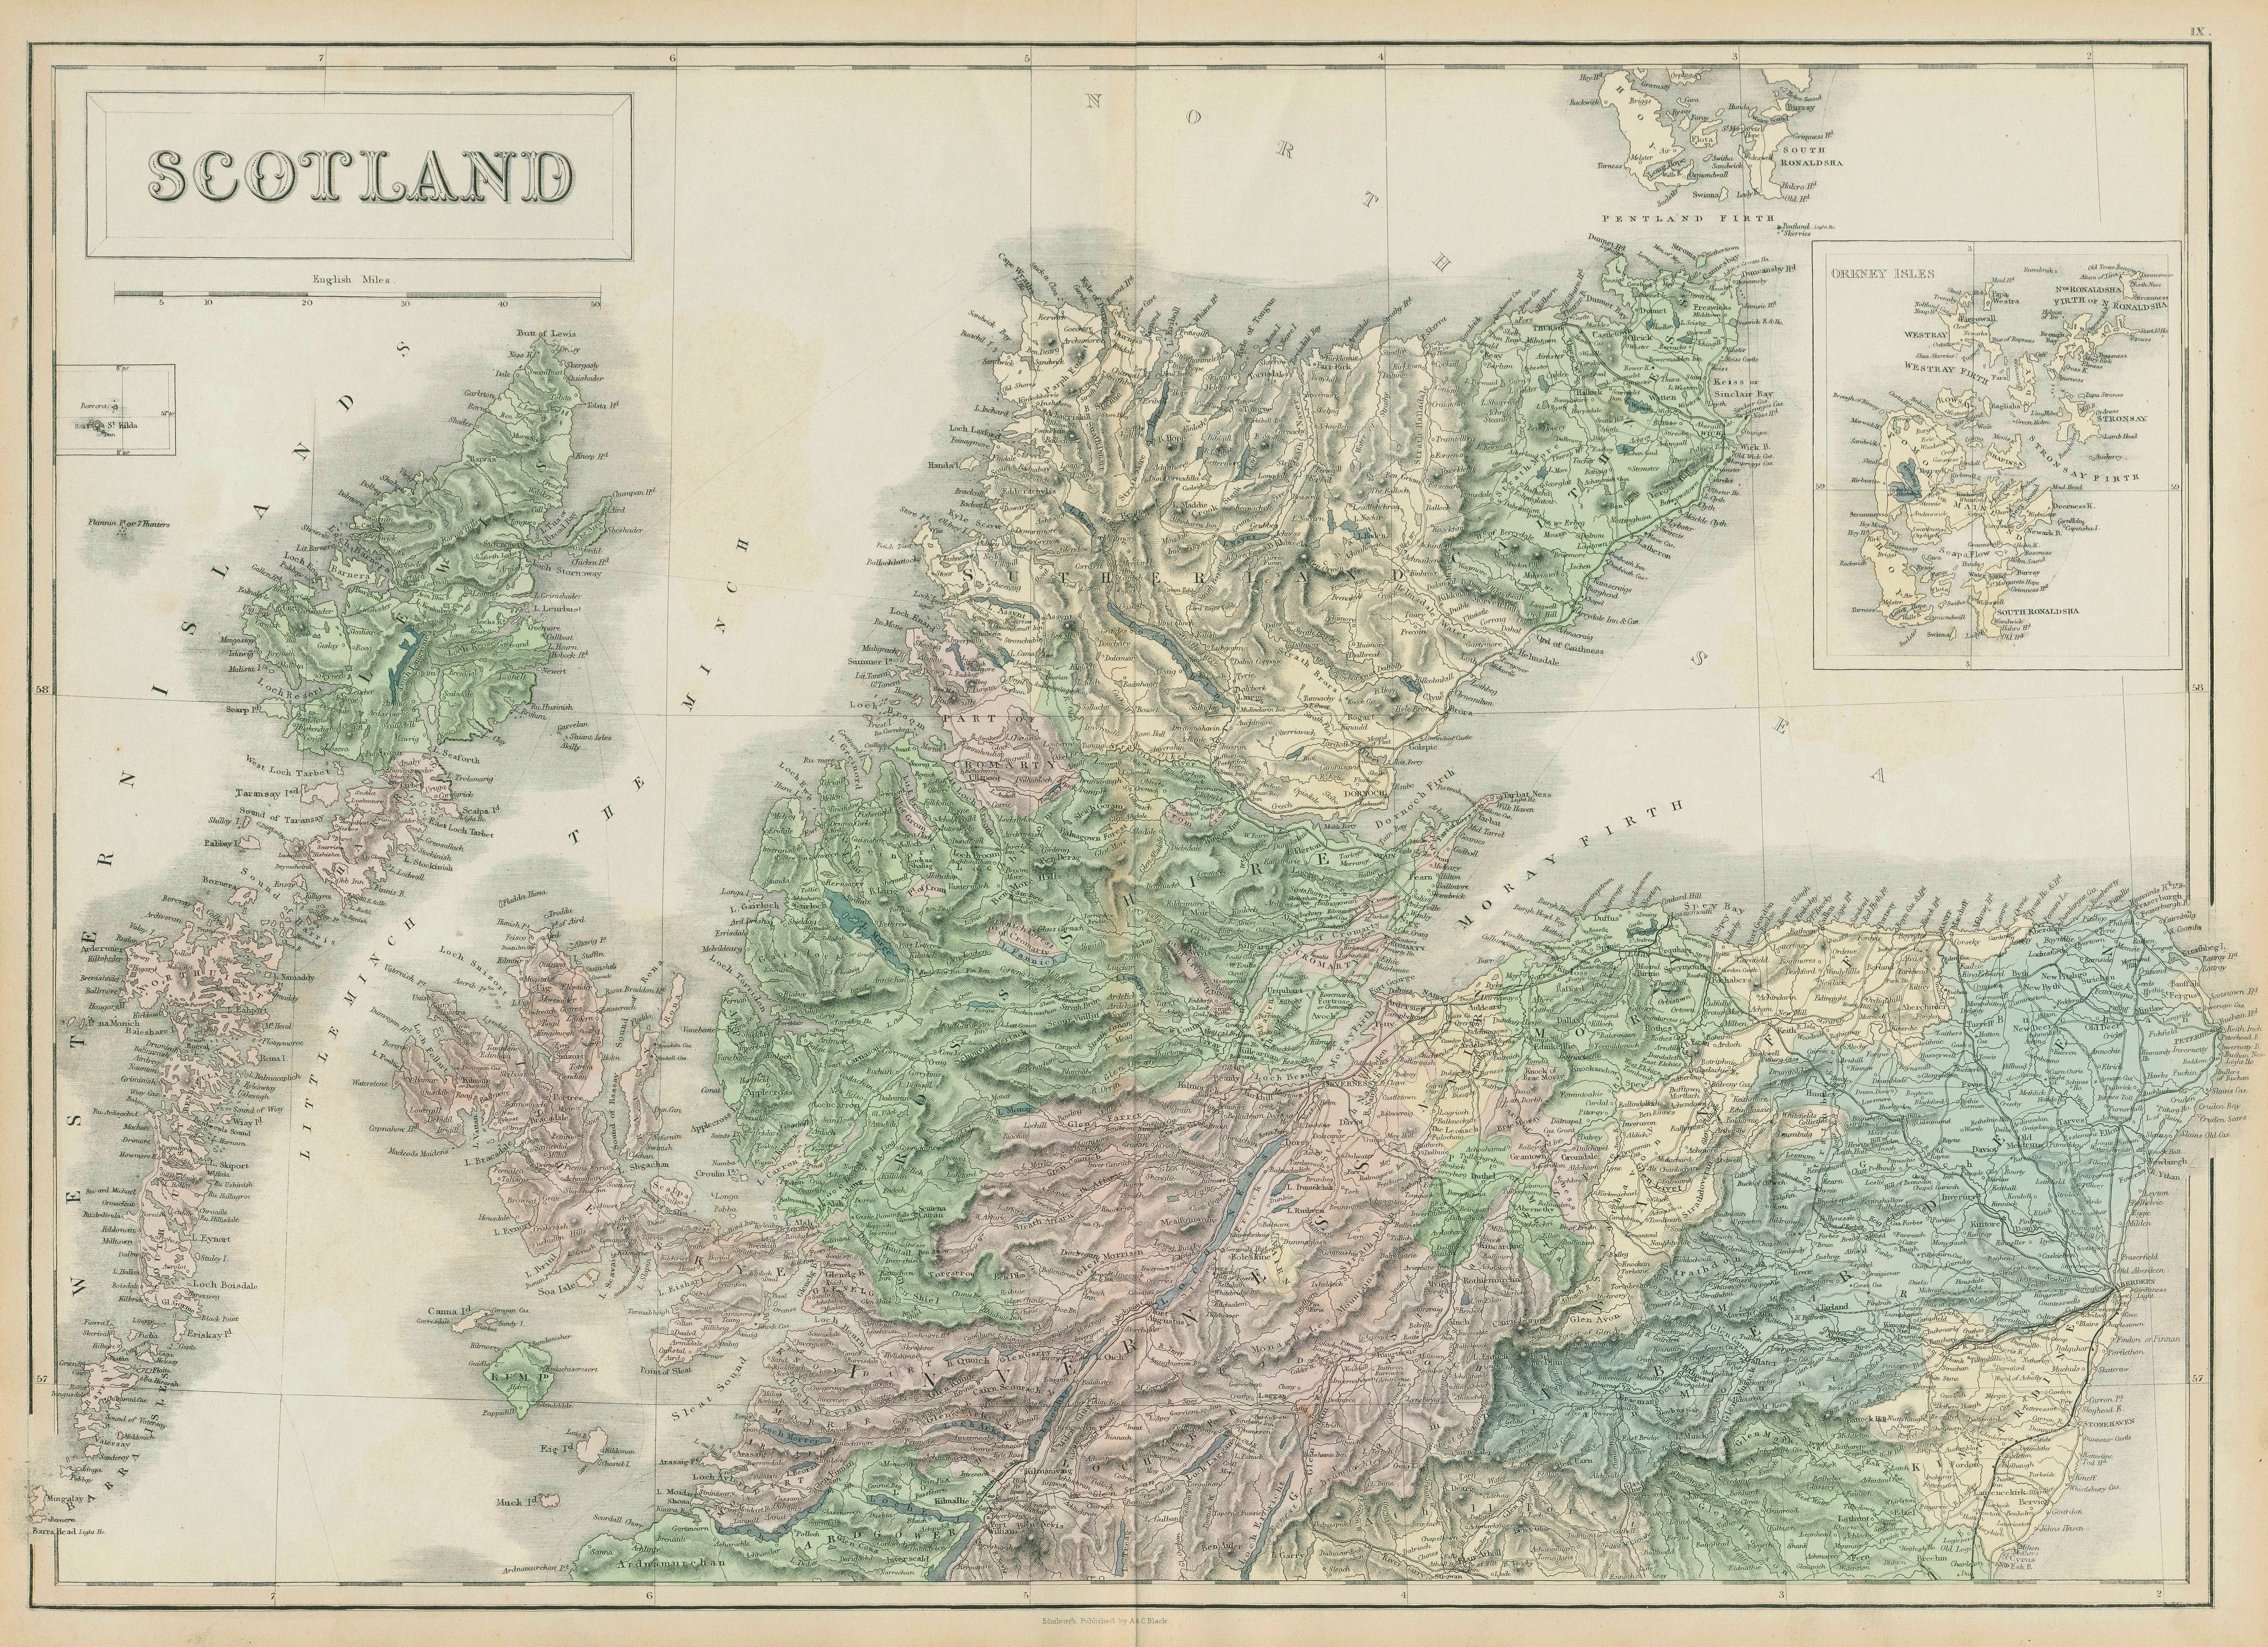 Associate Product Scotland. North sheet. Highlands and Islands. SIDNEY HALL 1856 old antique map